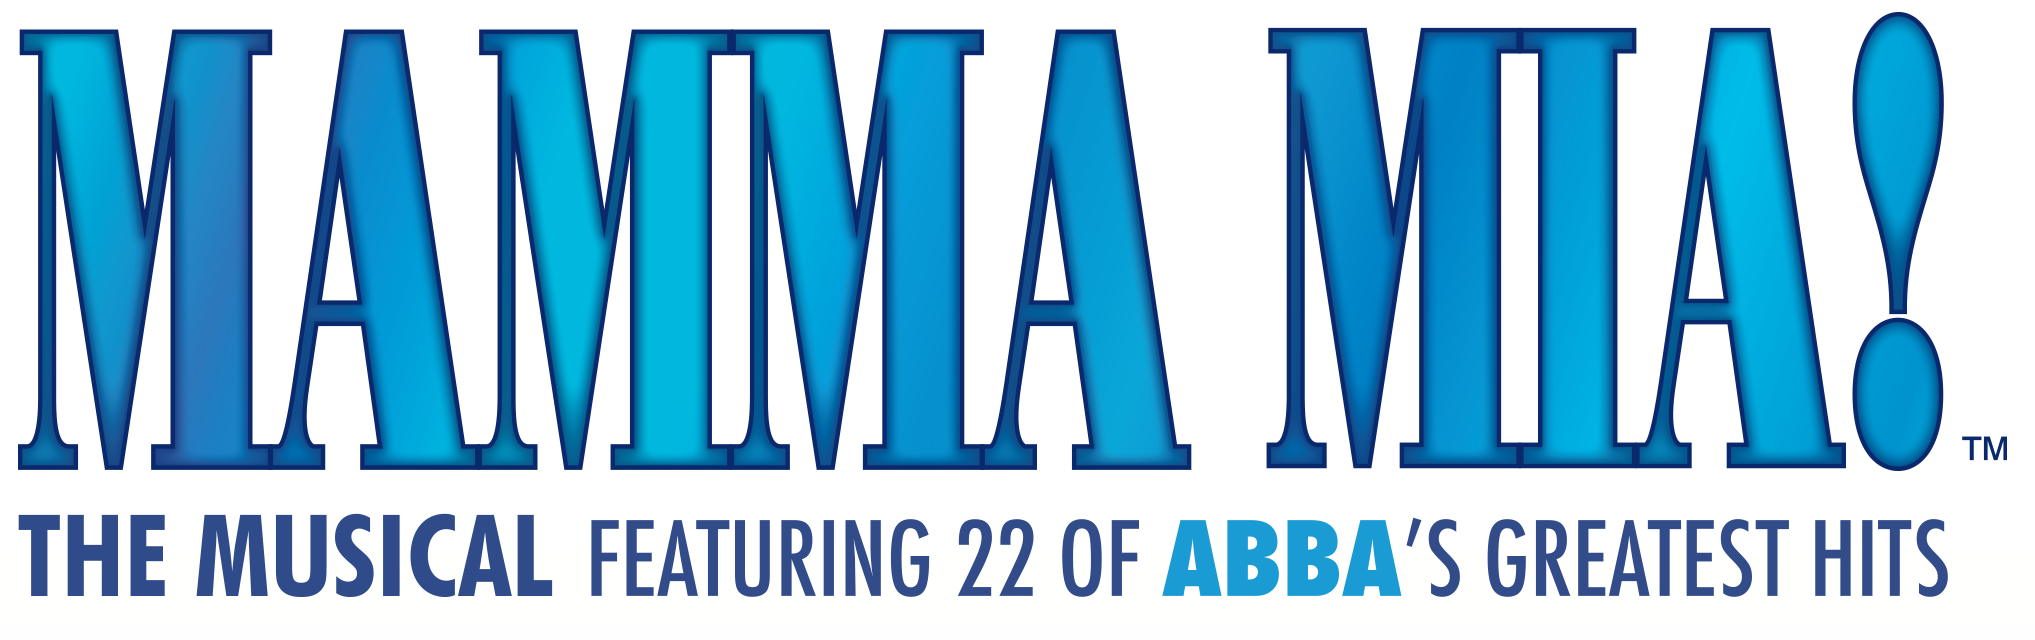 MAMMA MIA! The Musical. Featuring 22 of ABBA's Greatest Hits.